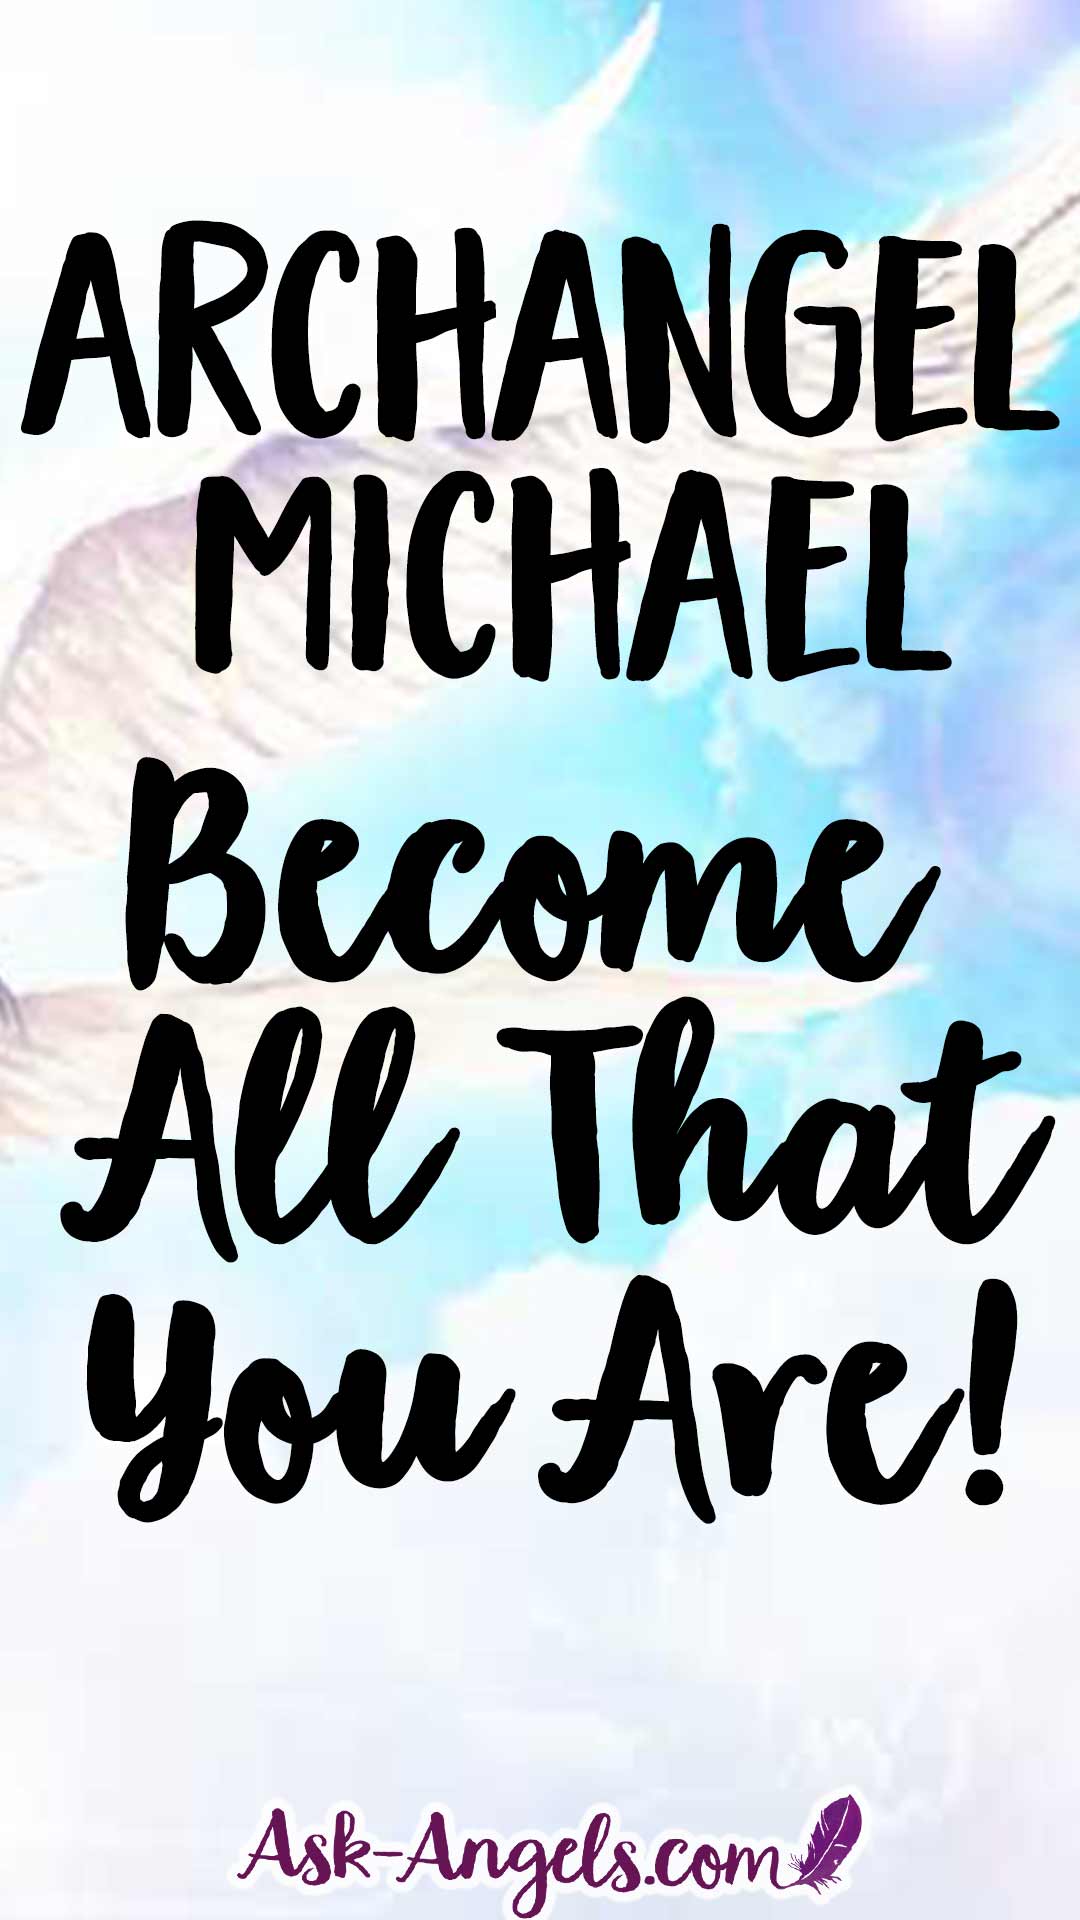 Archangel Michael Message - Become All That You Are